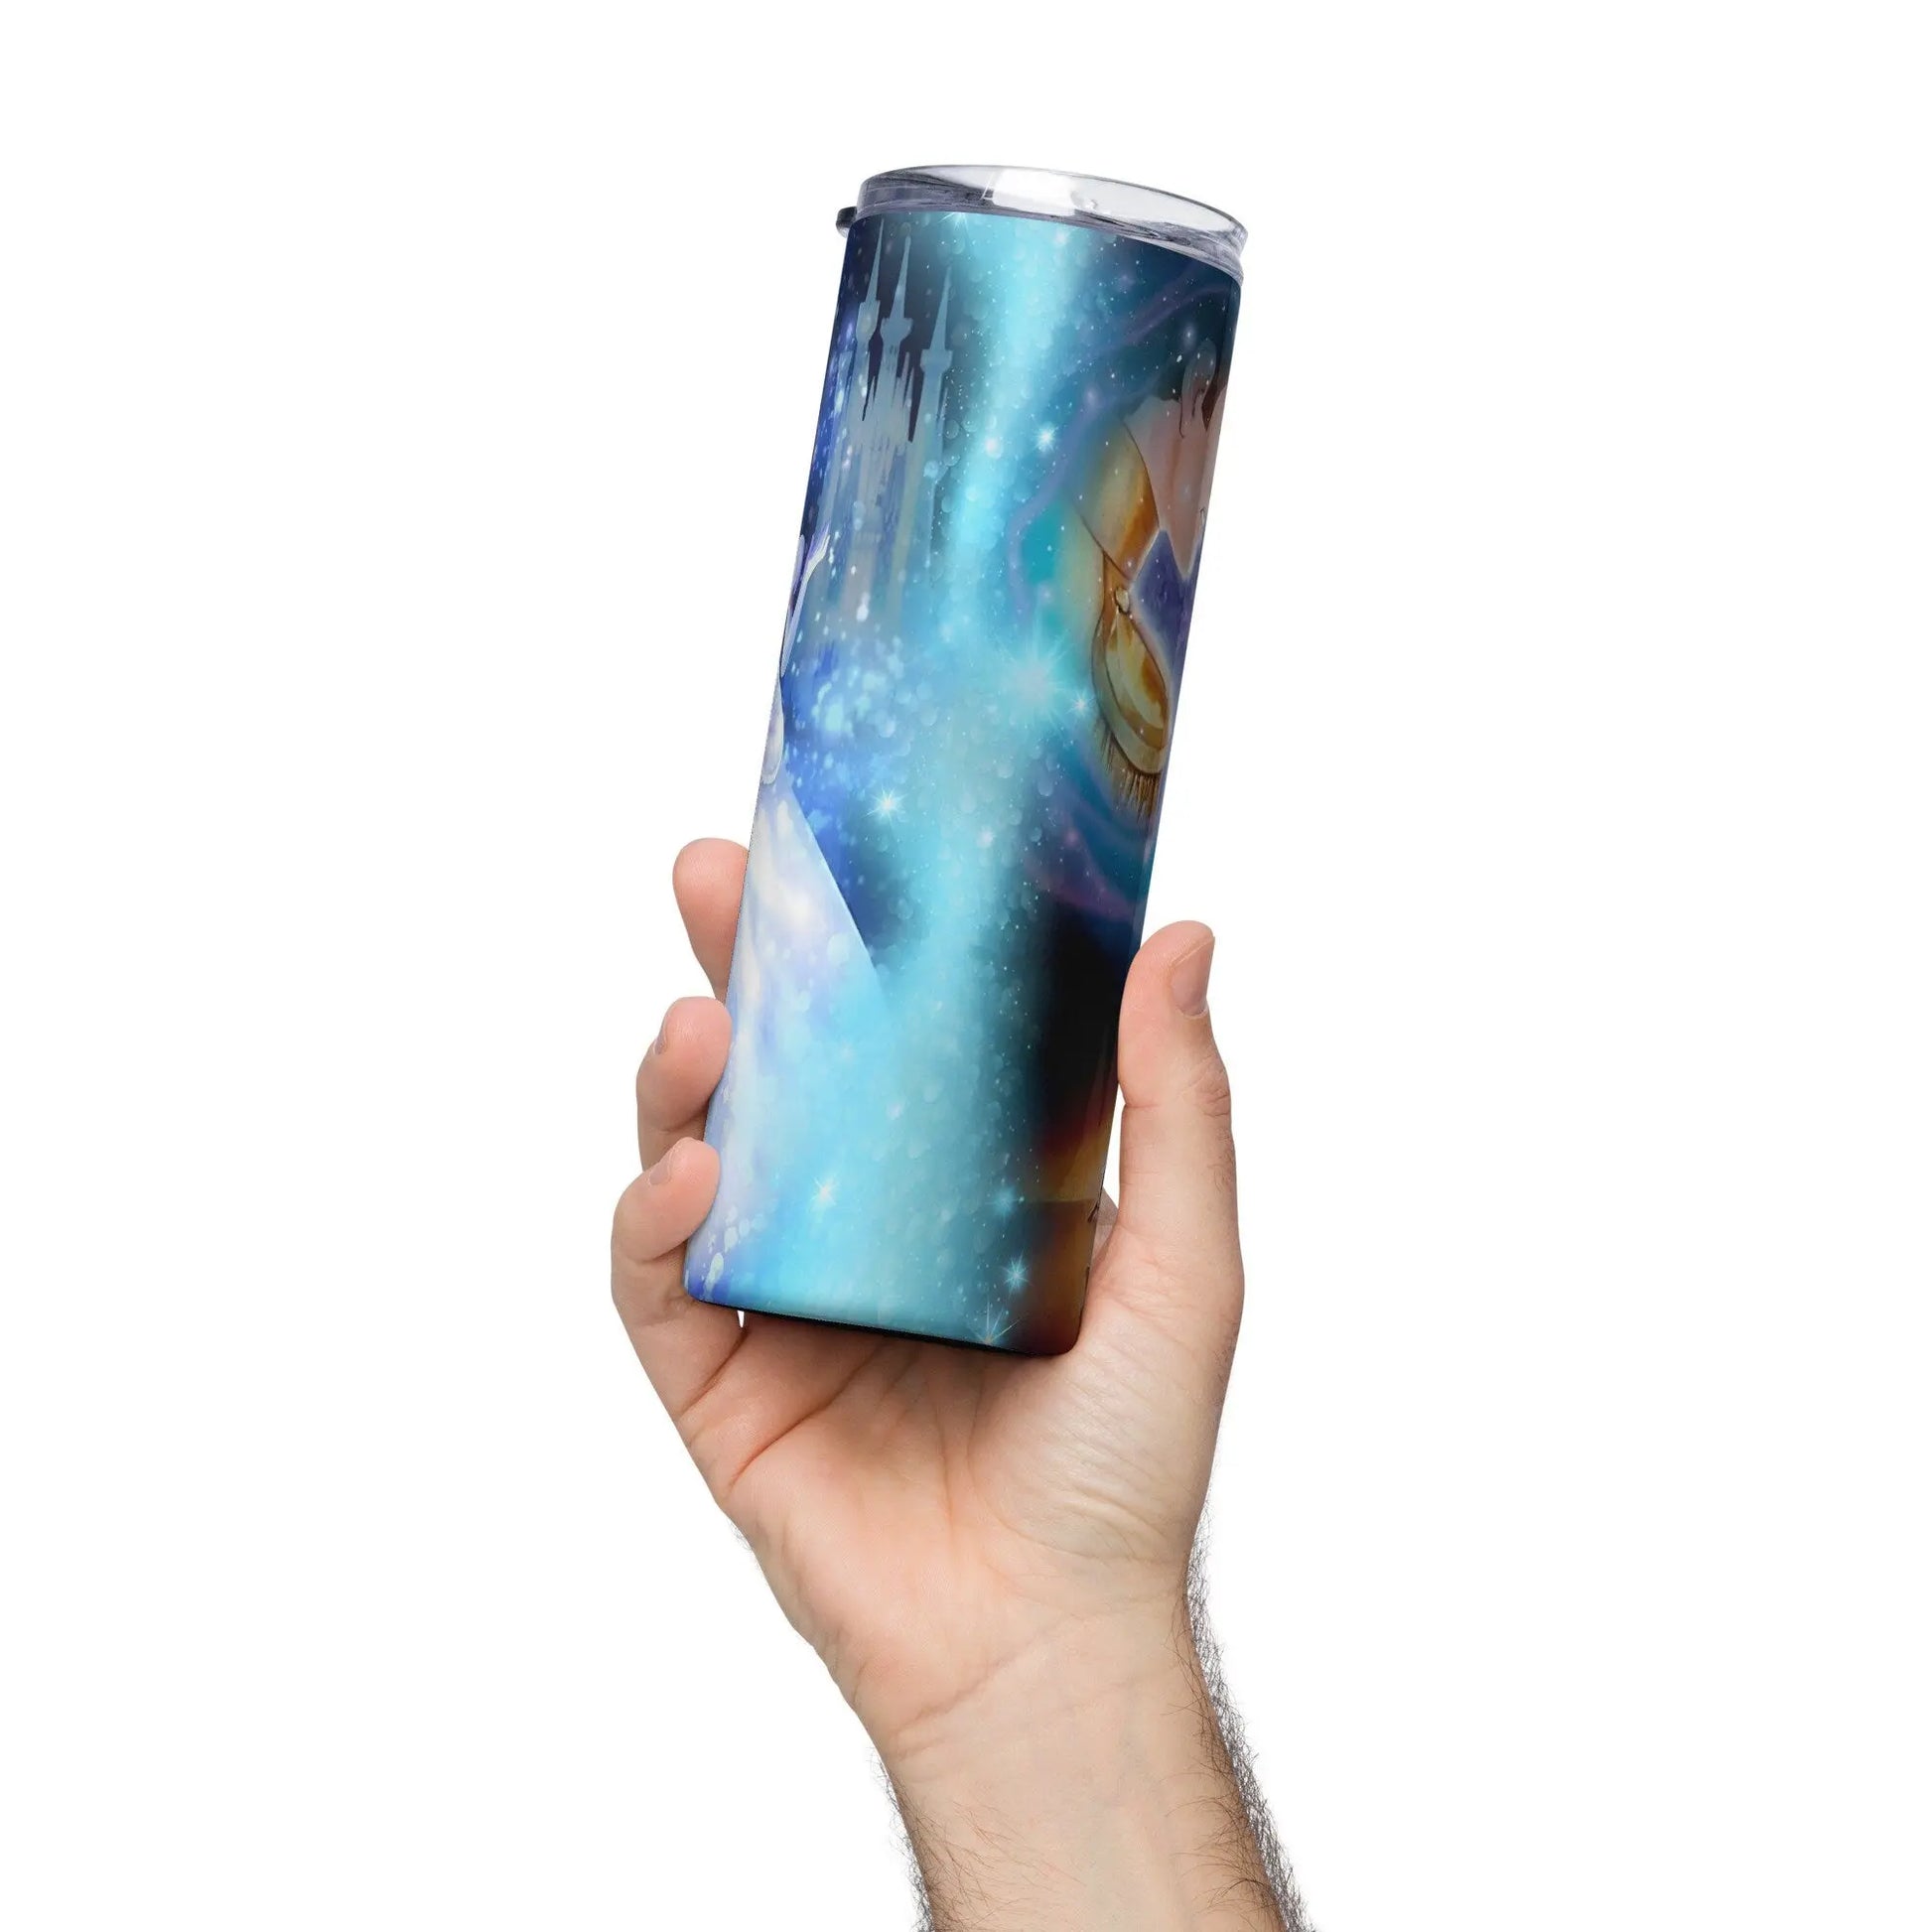 Cinderella Dreaming Of You Collage Sublimation Tumbler